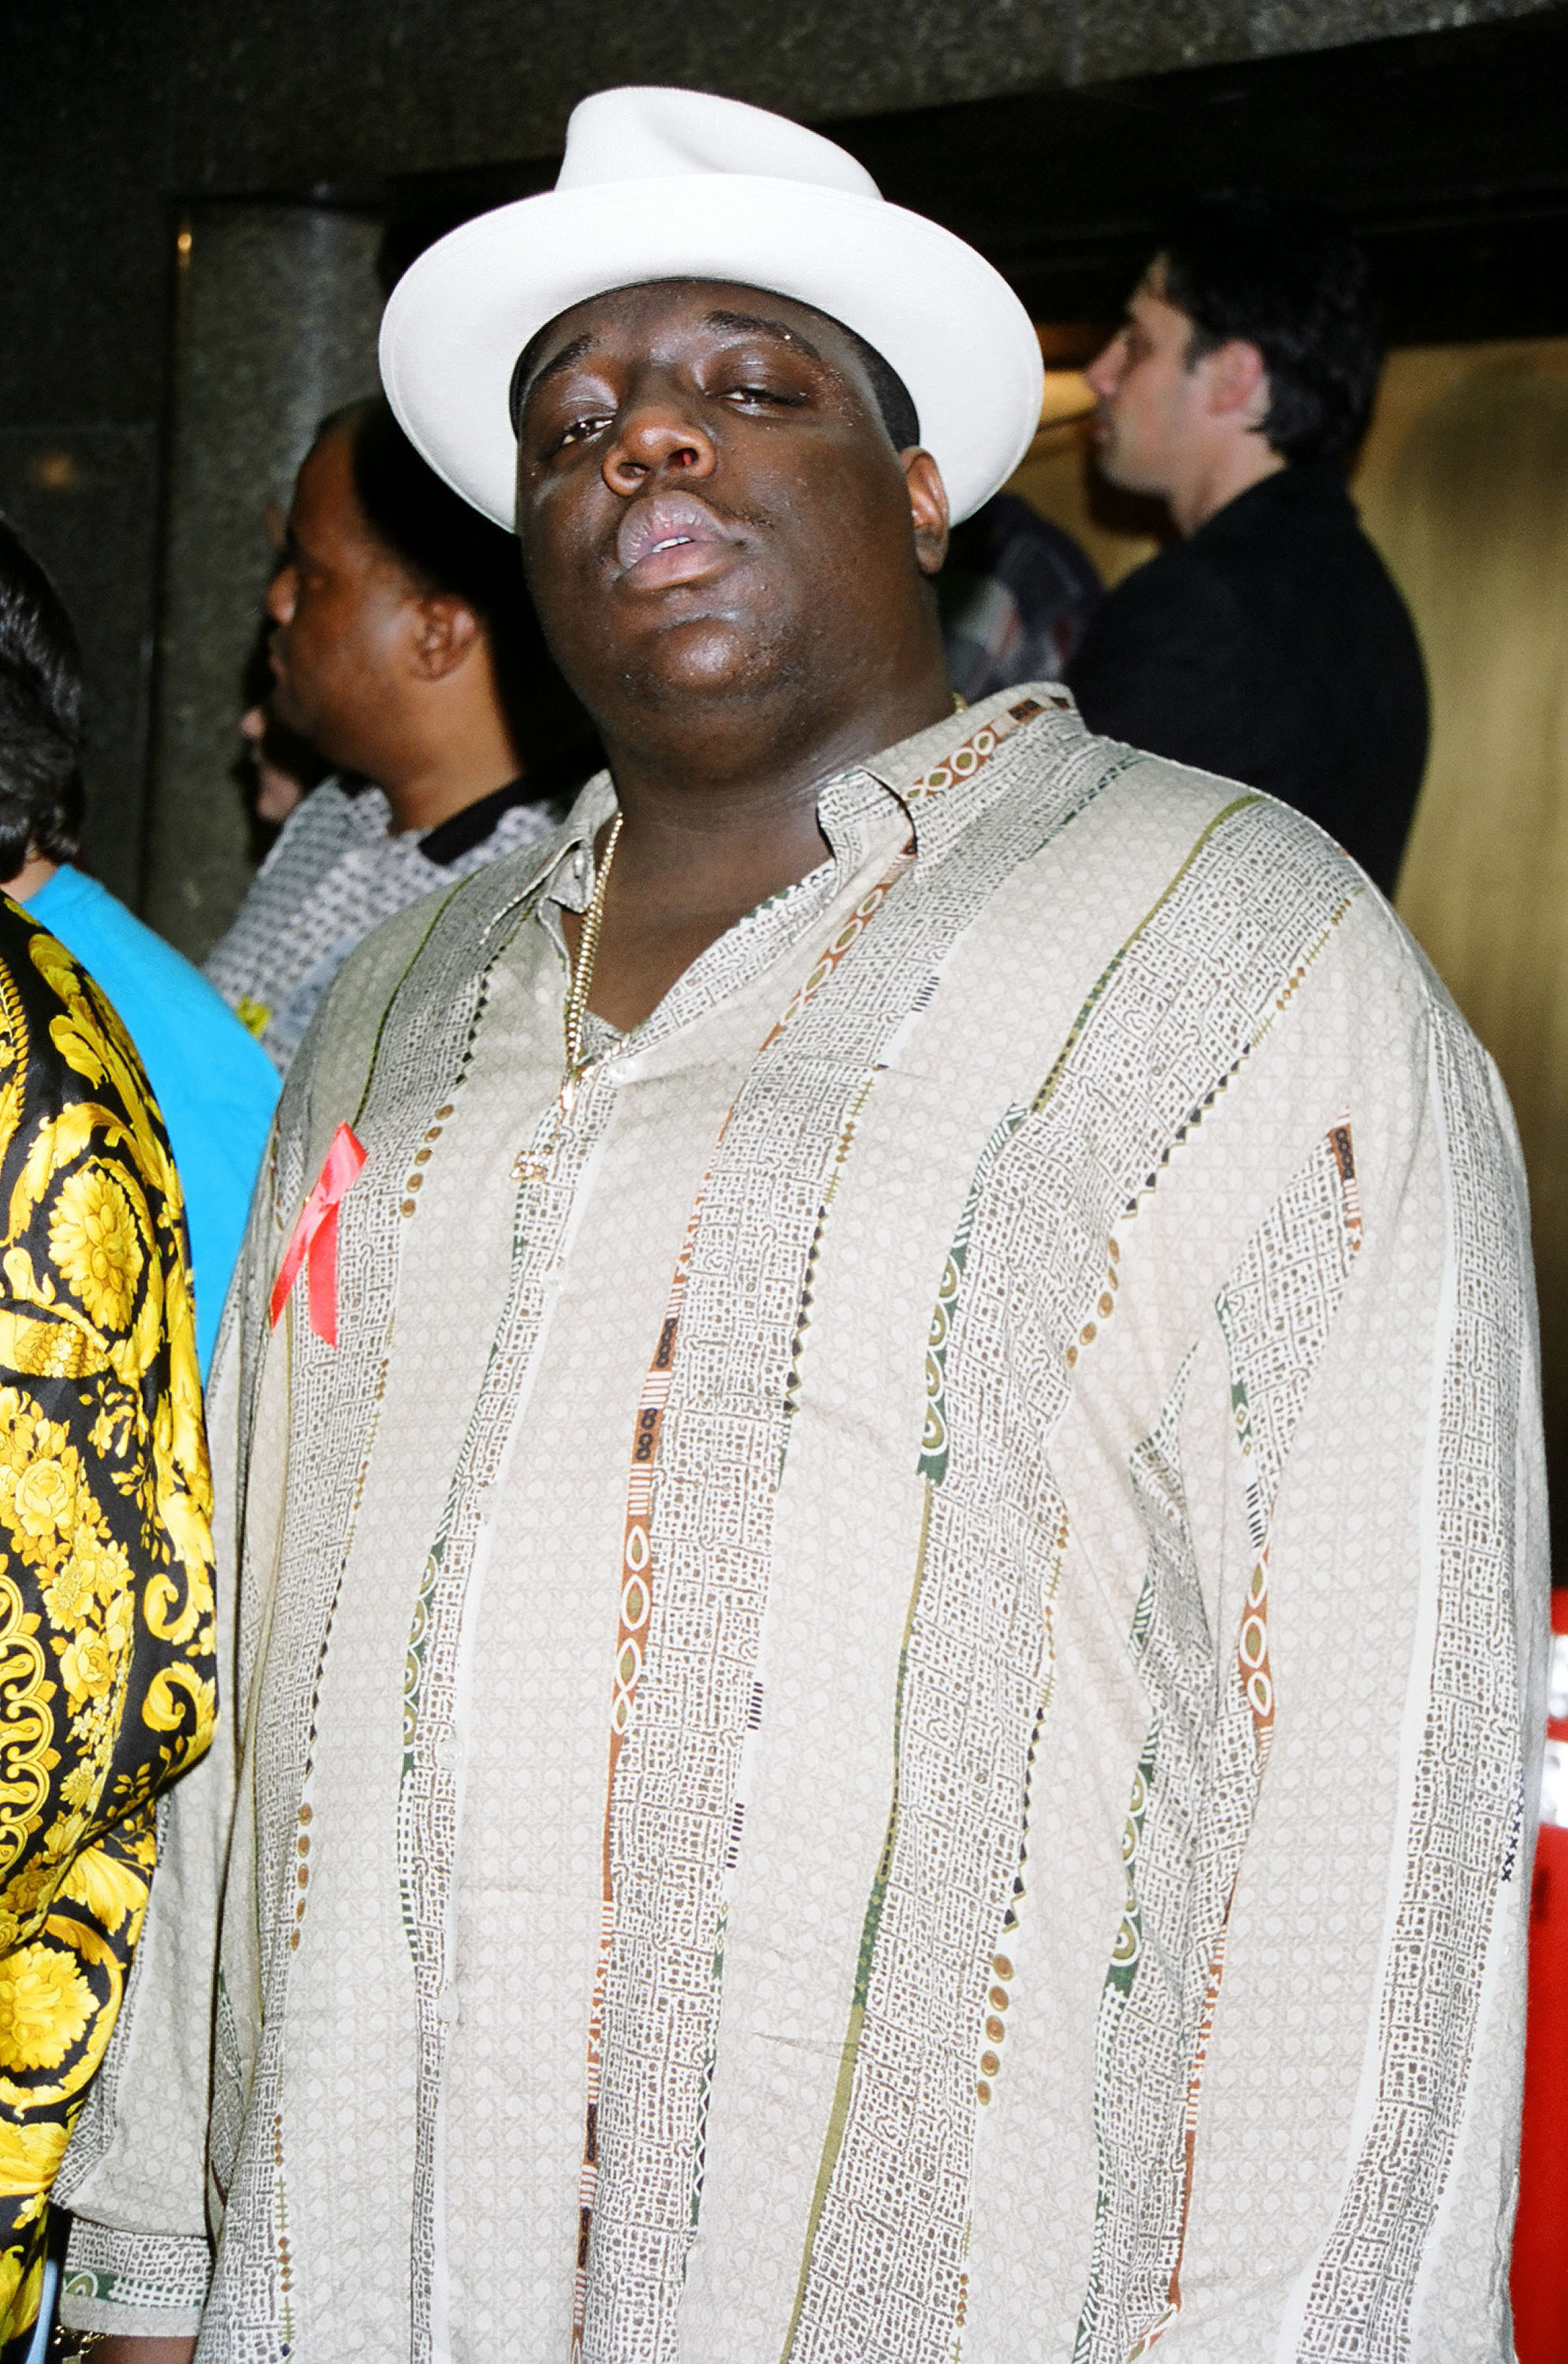 Biggie Smalls at the MTV Video Music Awards in 1995